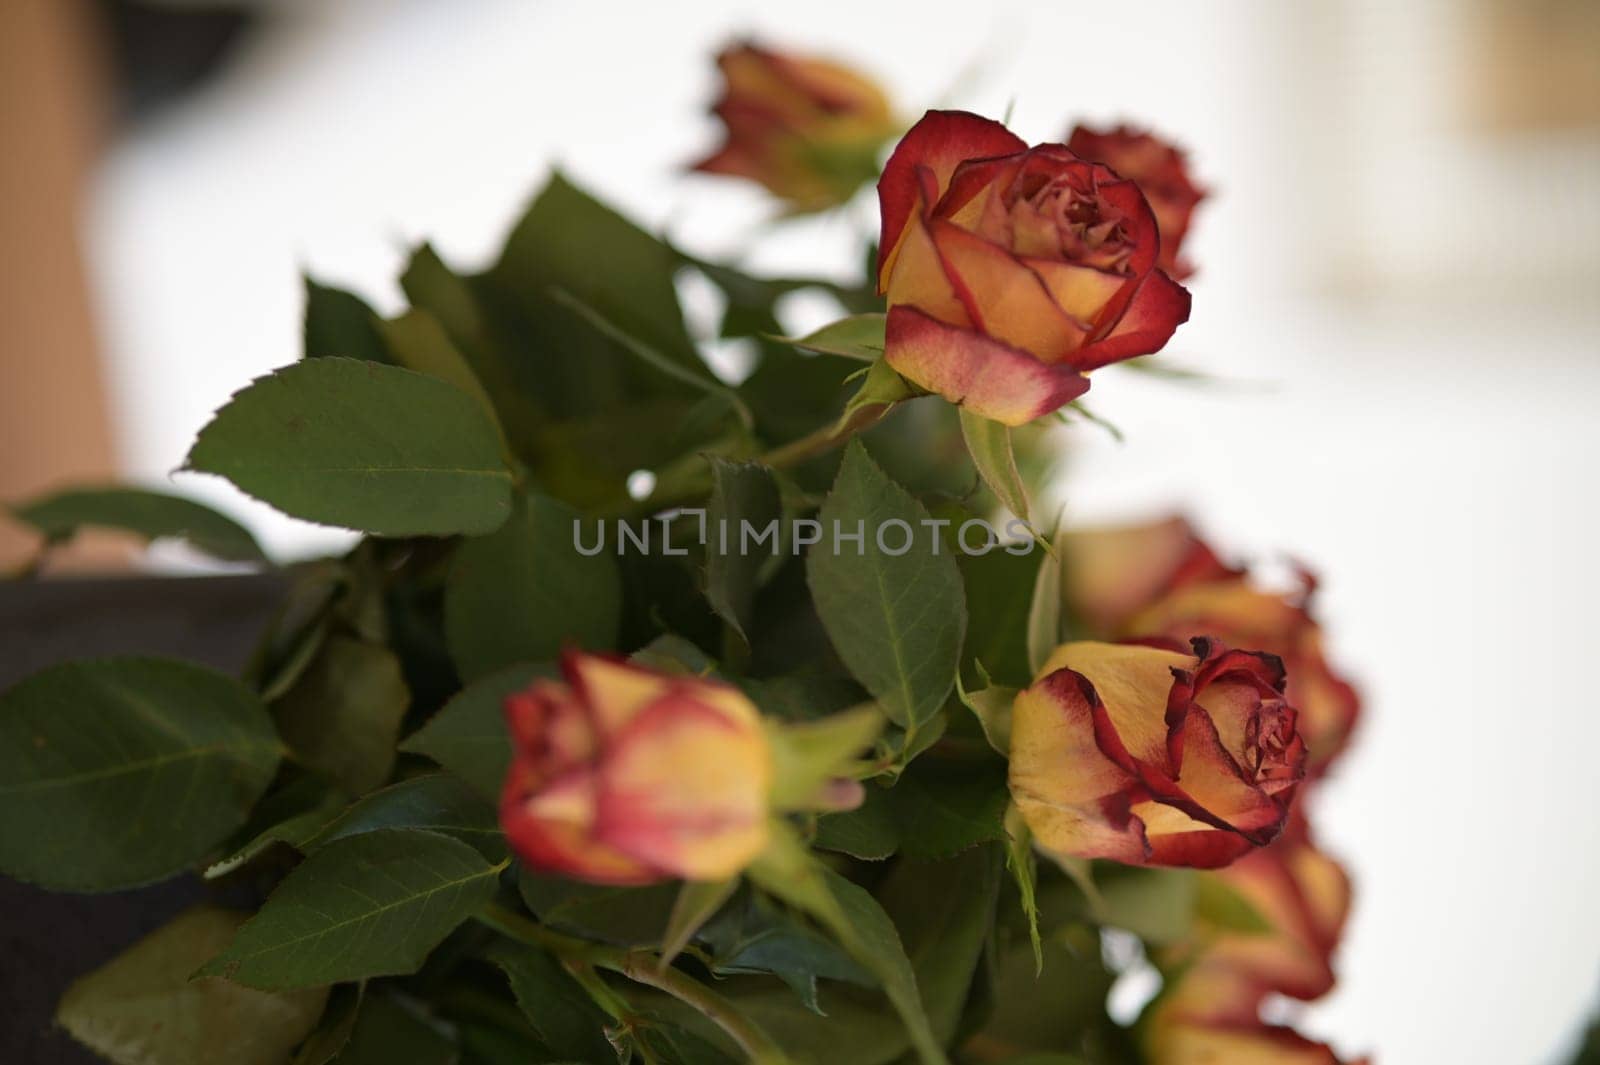 Yellow-red roses in a vase in detail by rherrmannde